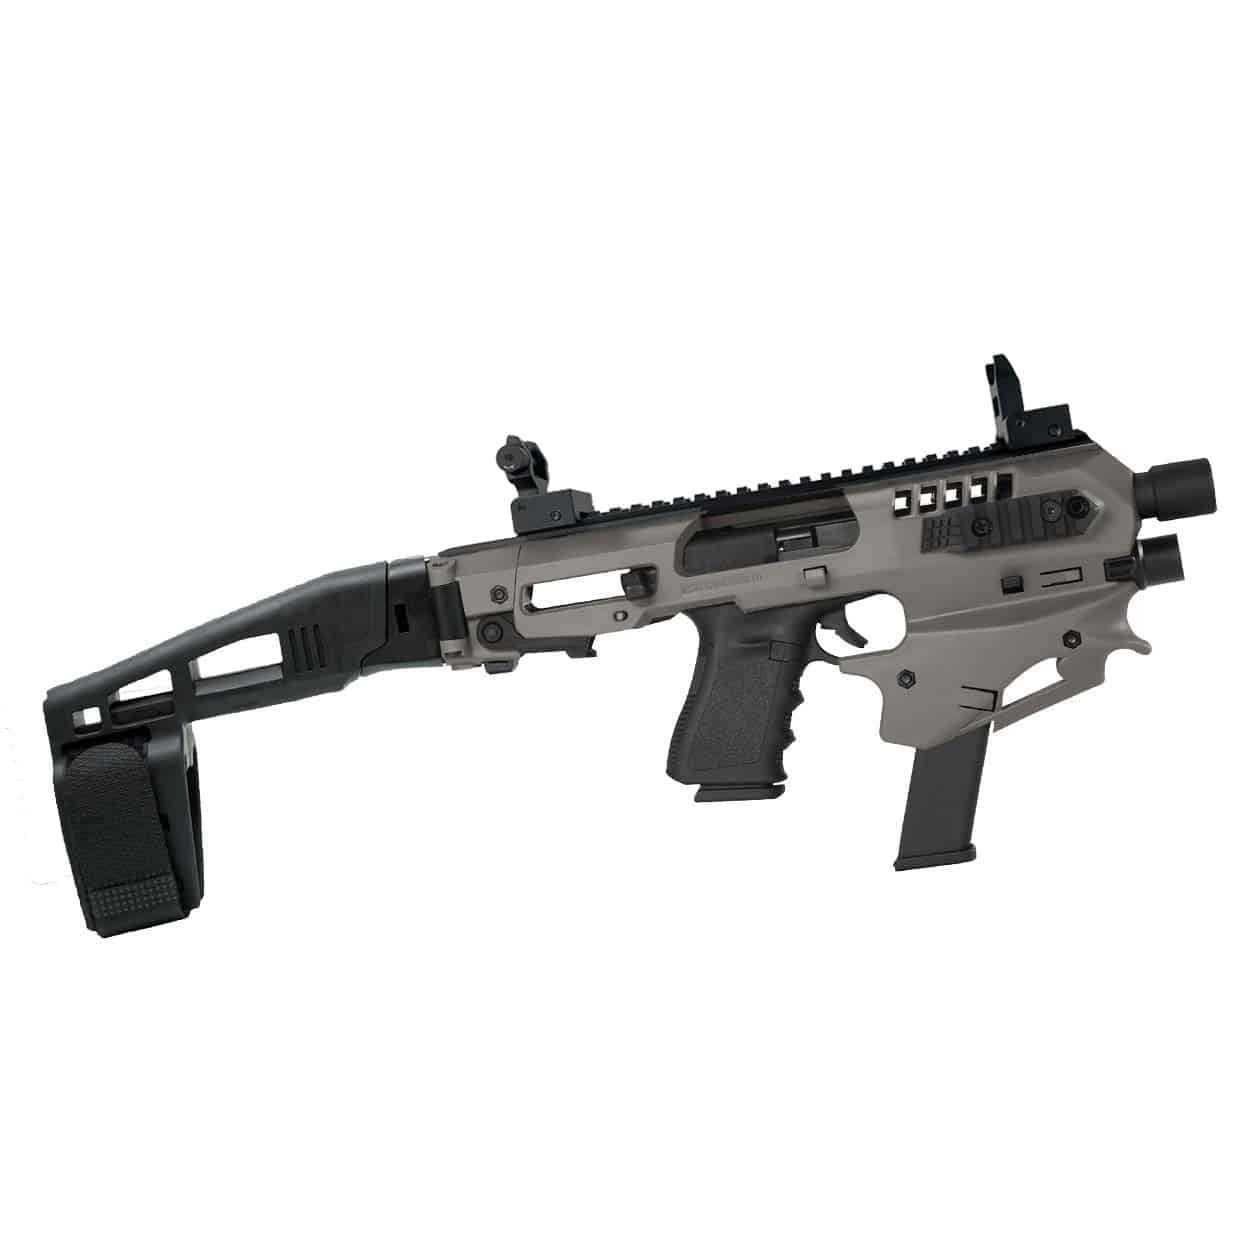 MCK Micro Conversion Kit, Glock Carbine for Glock 17, 19, 22 and More